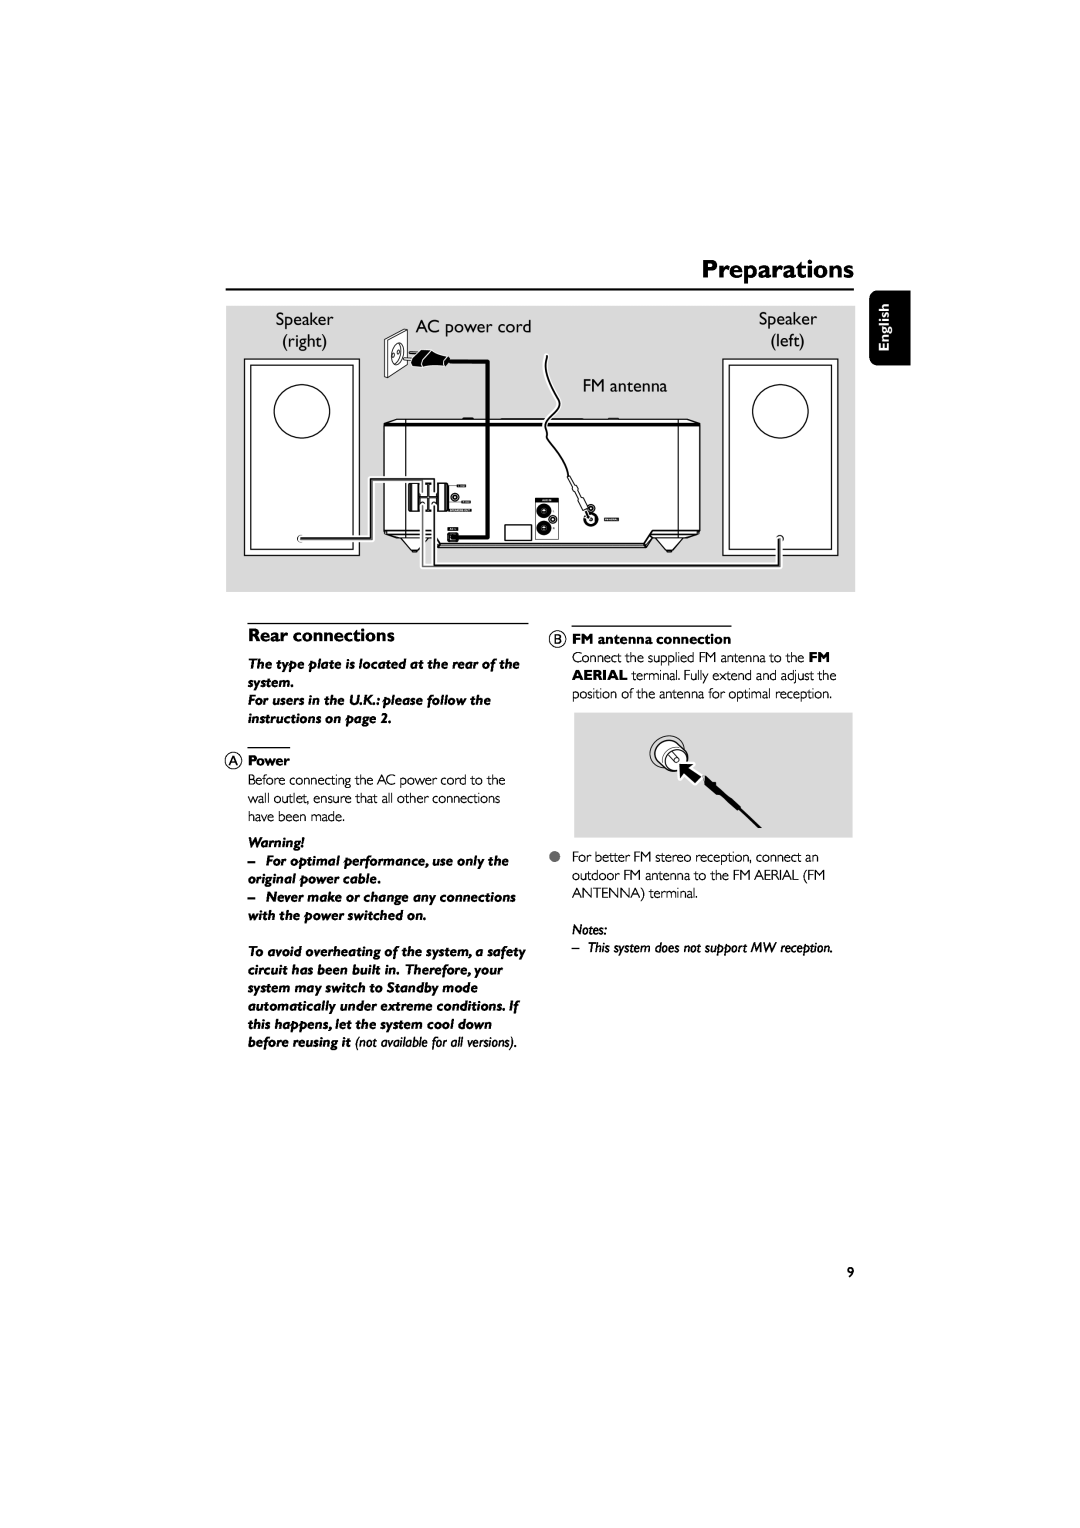 Philips MCM710 user manual Preparations, AC power cord, right, left, FM antenna, Rear connections, English, APower 